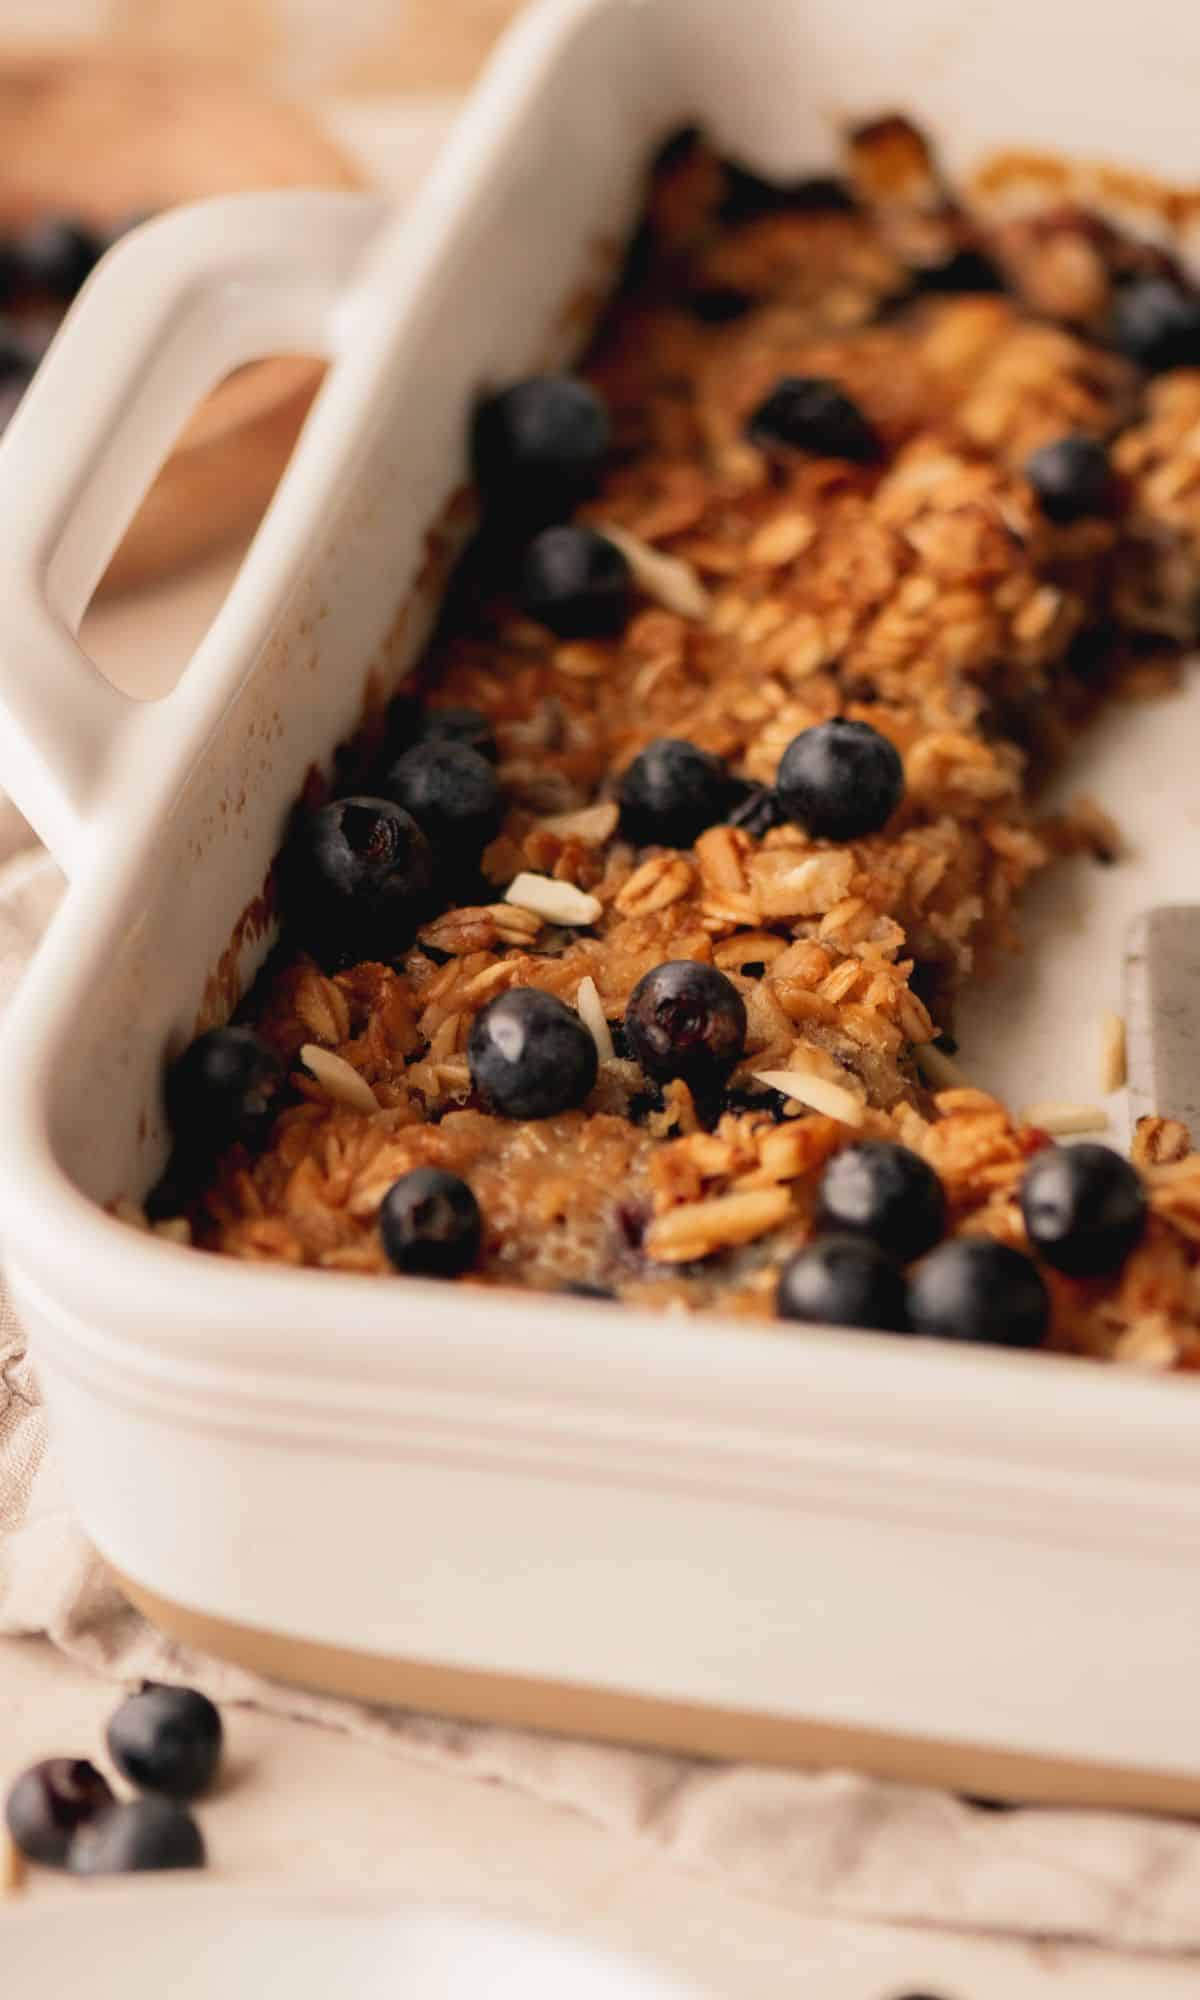 Banana blueberry baked oats in white baking dish with slices removed.